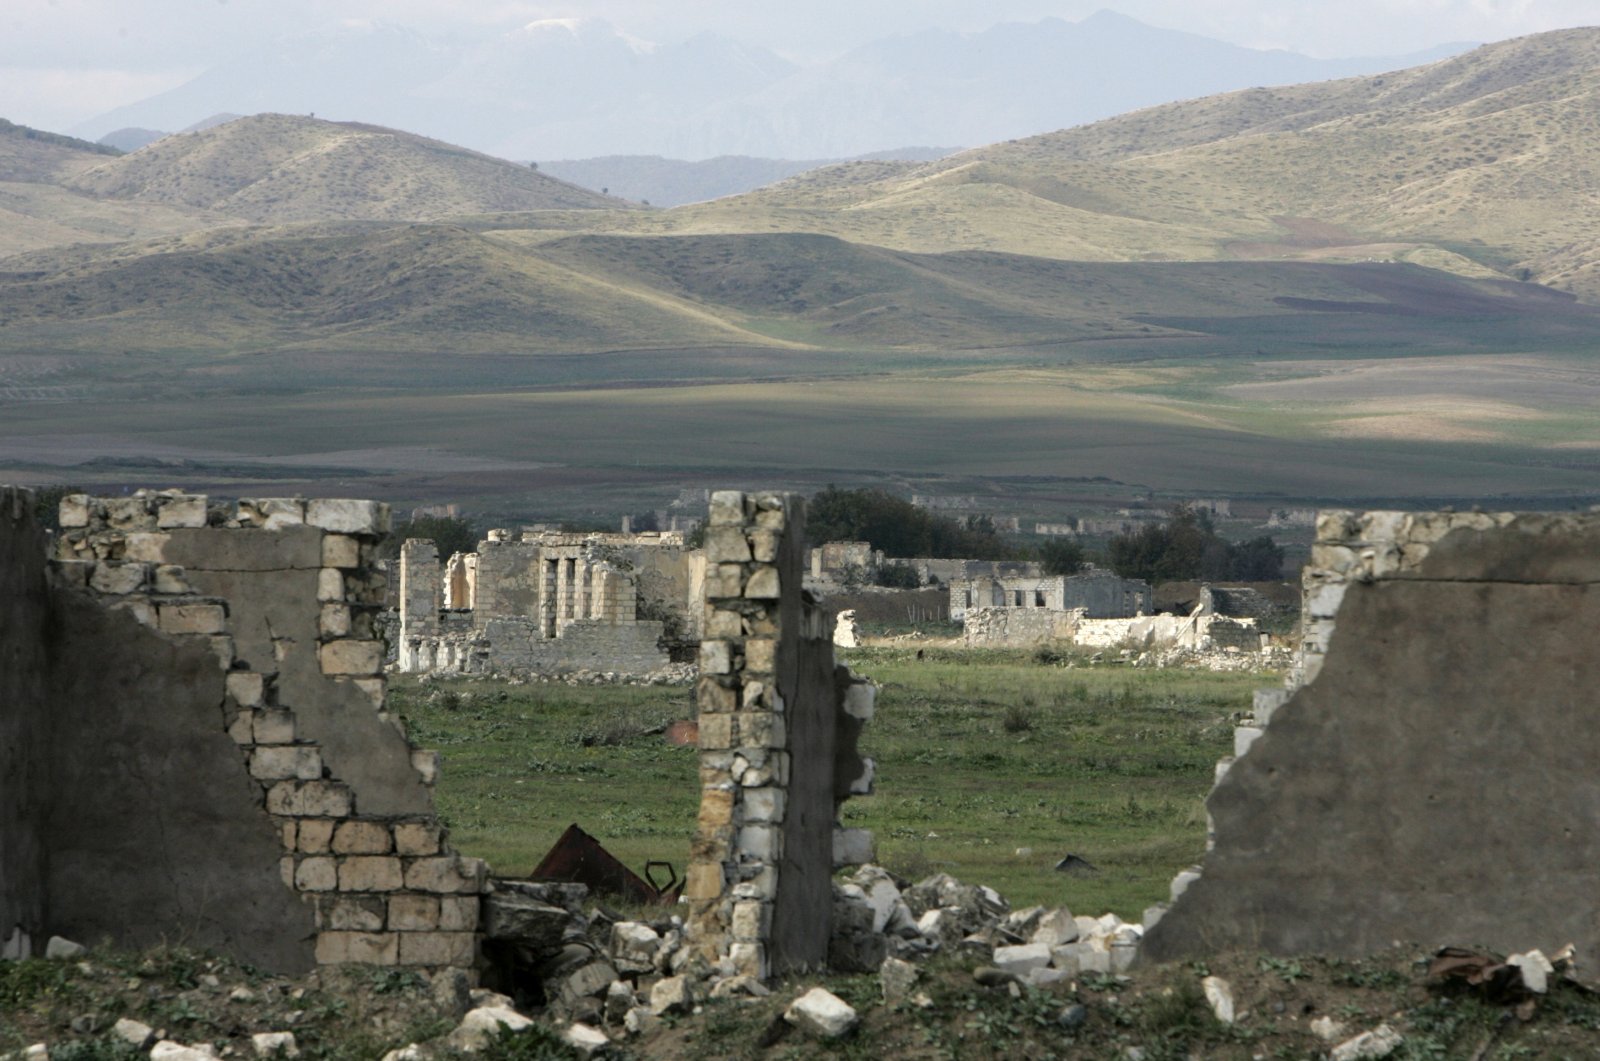 Ruins are seen, and which were completely destroyed during fighting in the 1990s, in the town of Agdam, in Nagorno Karabakh, Oct. 29, 2009. (Reuters Photo)